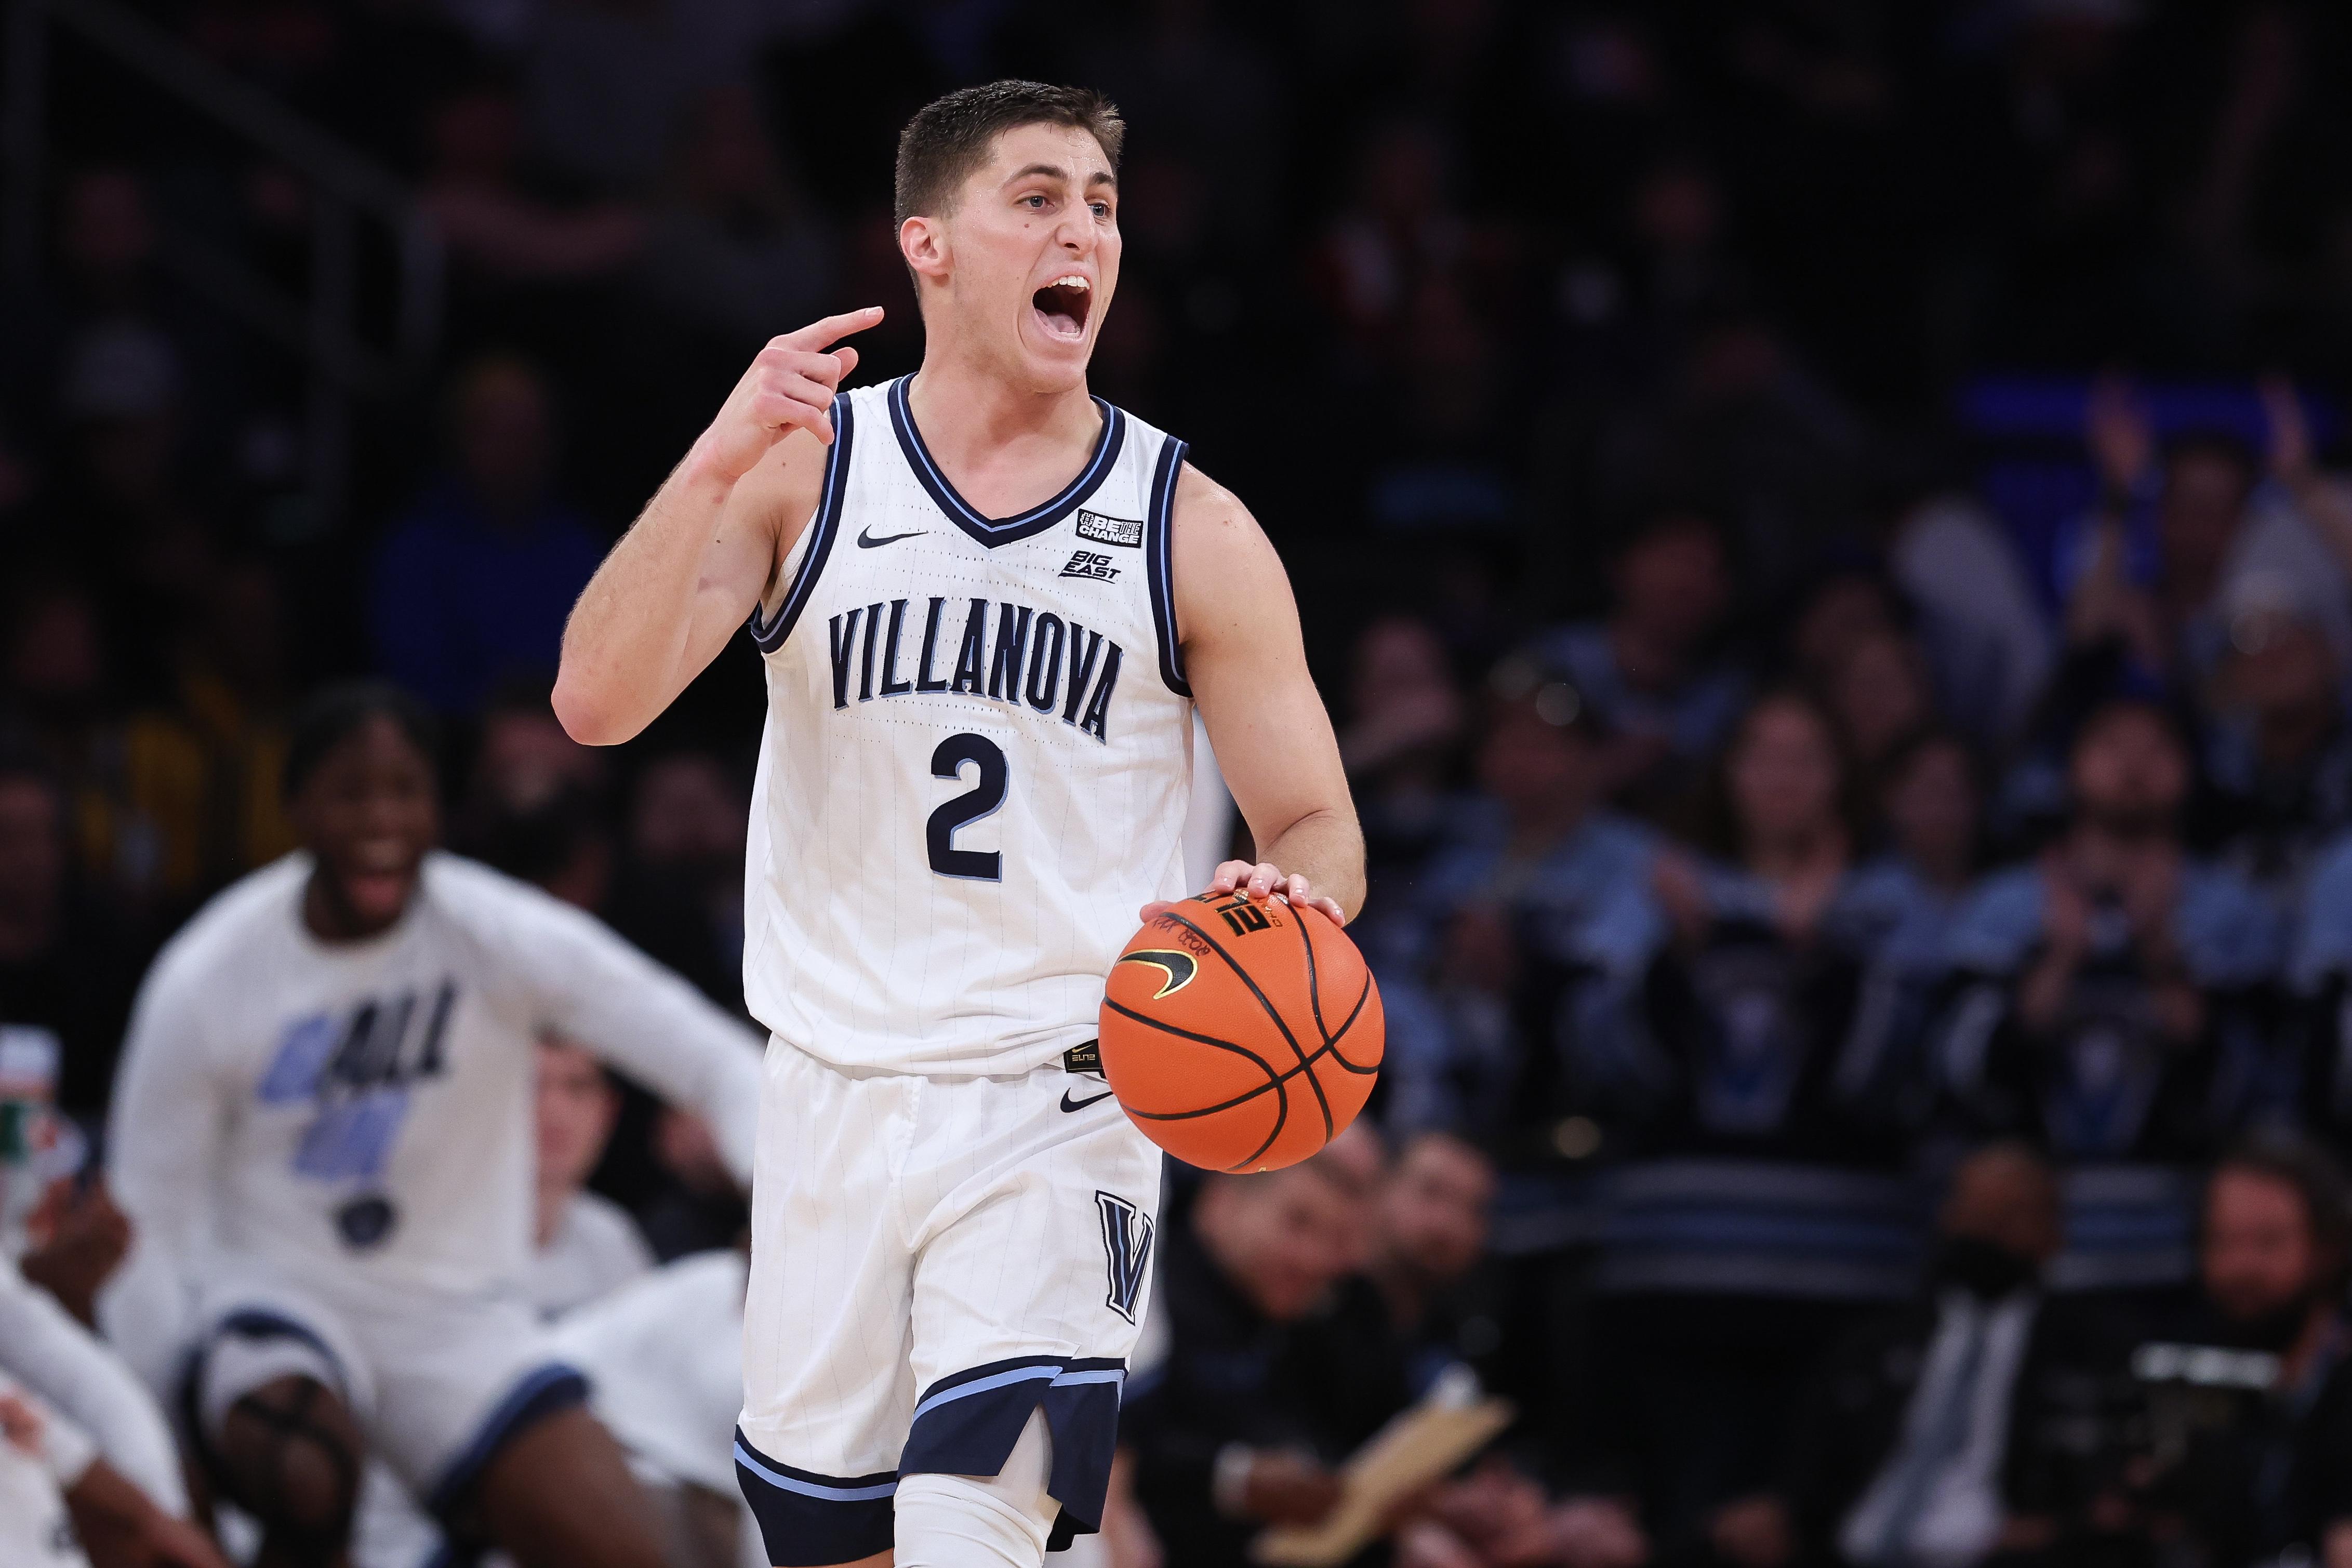 Villanova March Madness Schedule Next Game Time, Date, TV Channel for 2022 NCAA Basketball Tournament (Updated) FanDuel Research